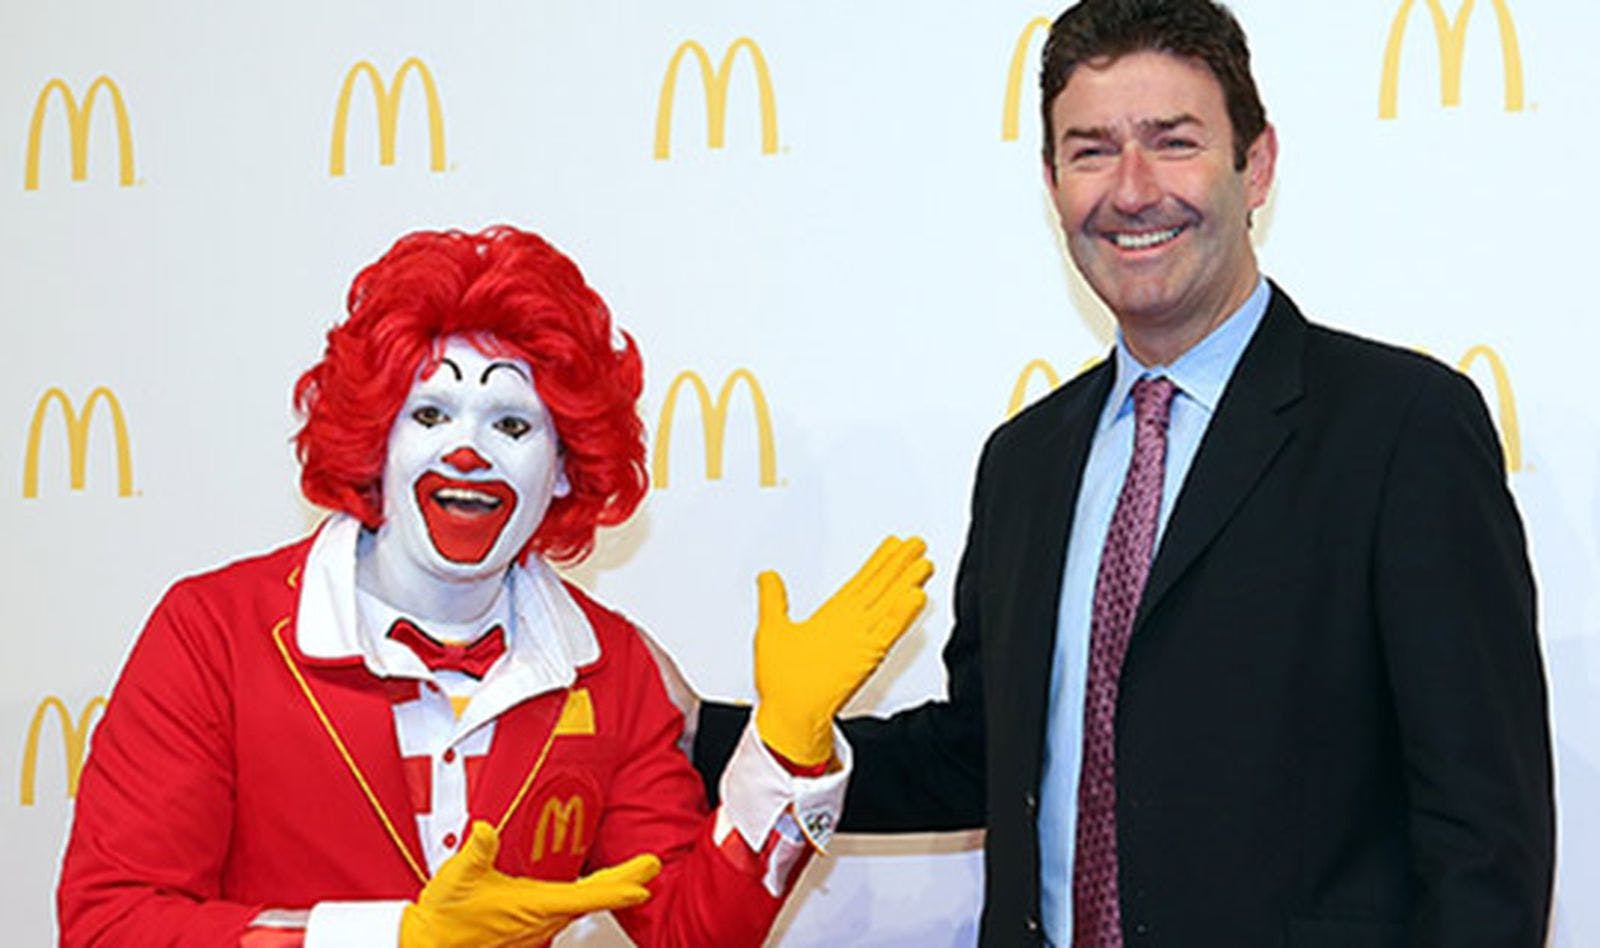 McDonald’s Ex-CEO fined for allegedly misleading investors about his firing